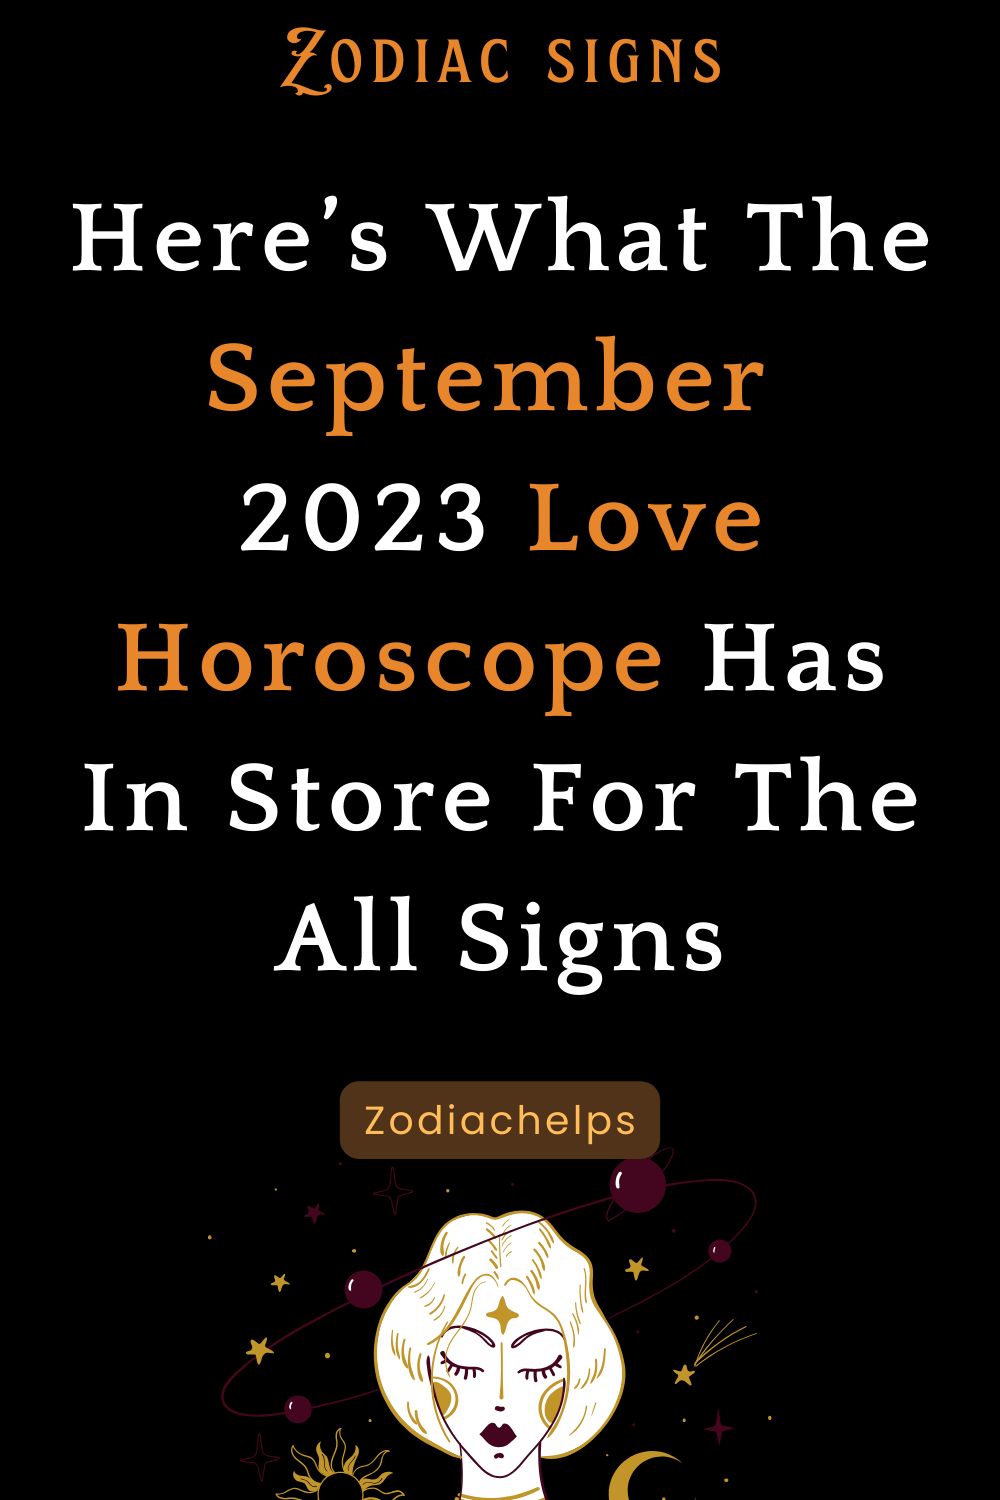 Here’s What The September 2023 Love Horoscope Has In Store For The All Signs